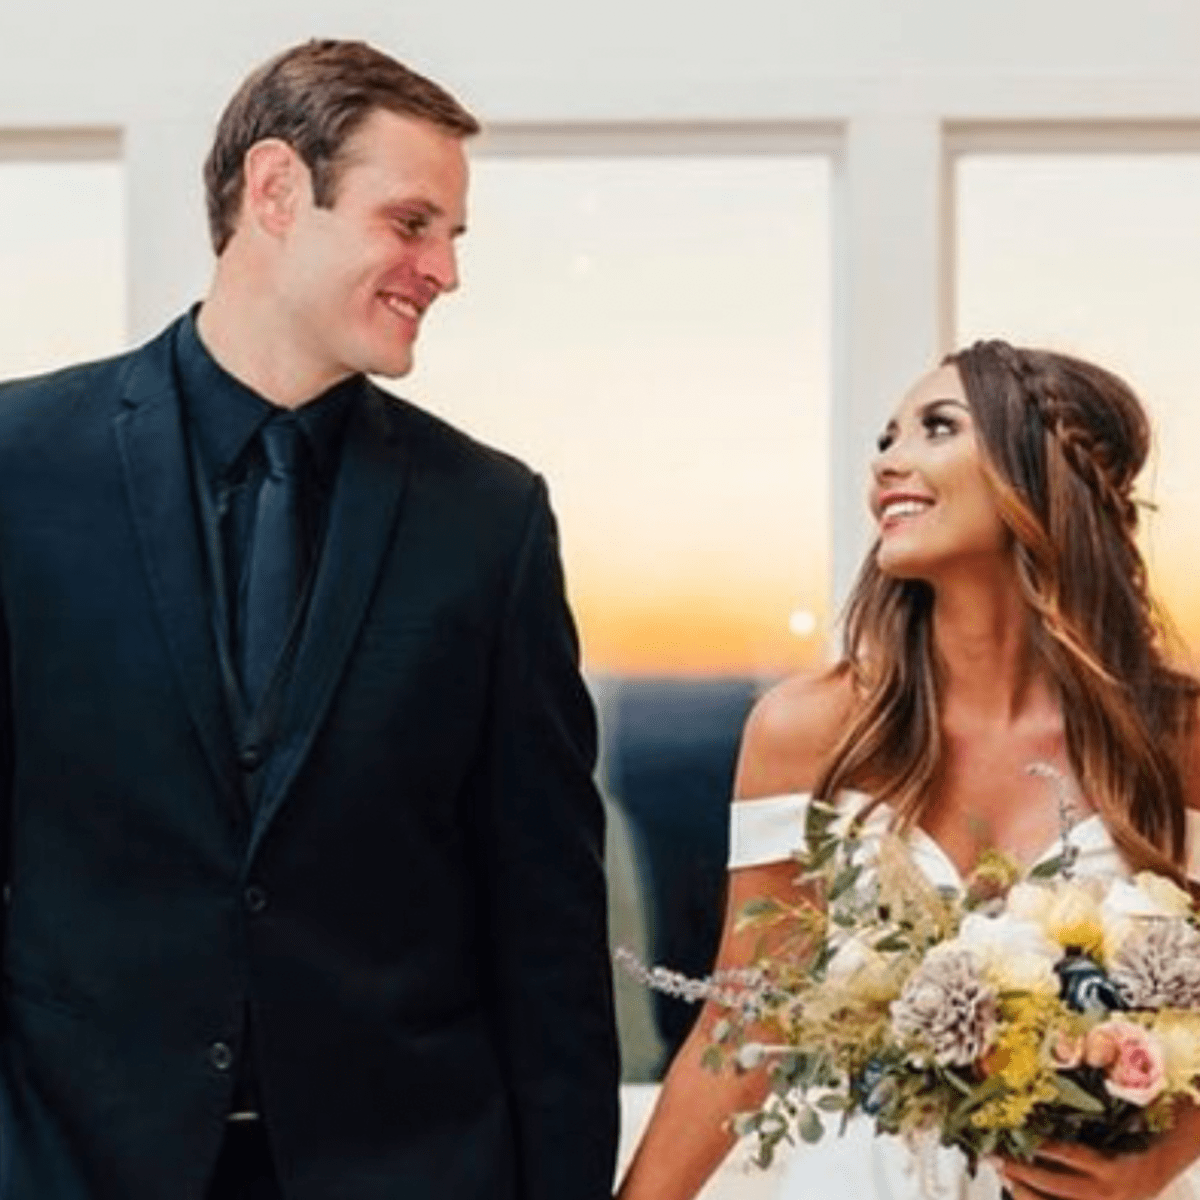 Ryan Mallett's Ex-Wife Says Her 'Heart Breaks' After His Drowning